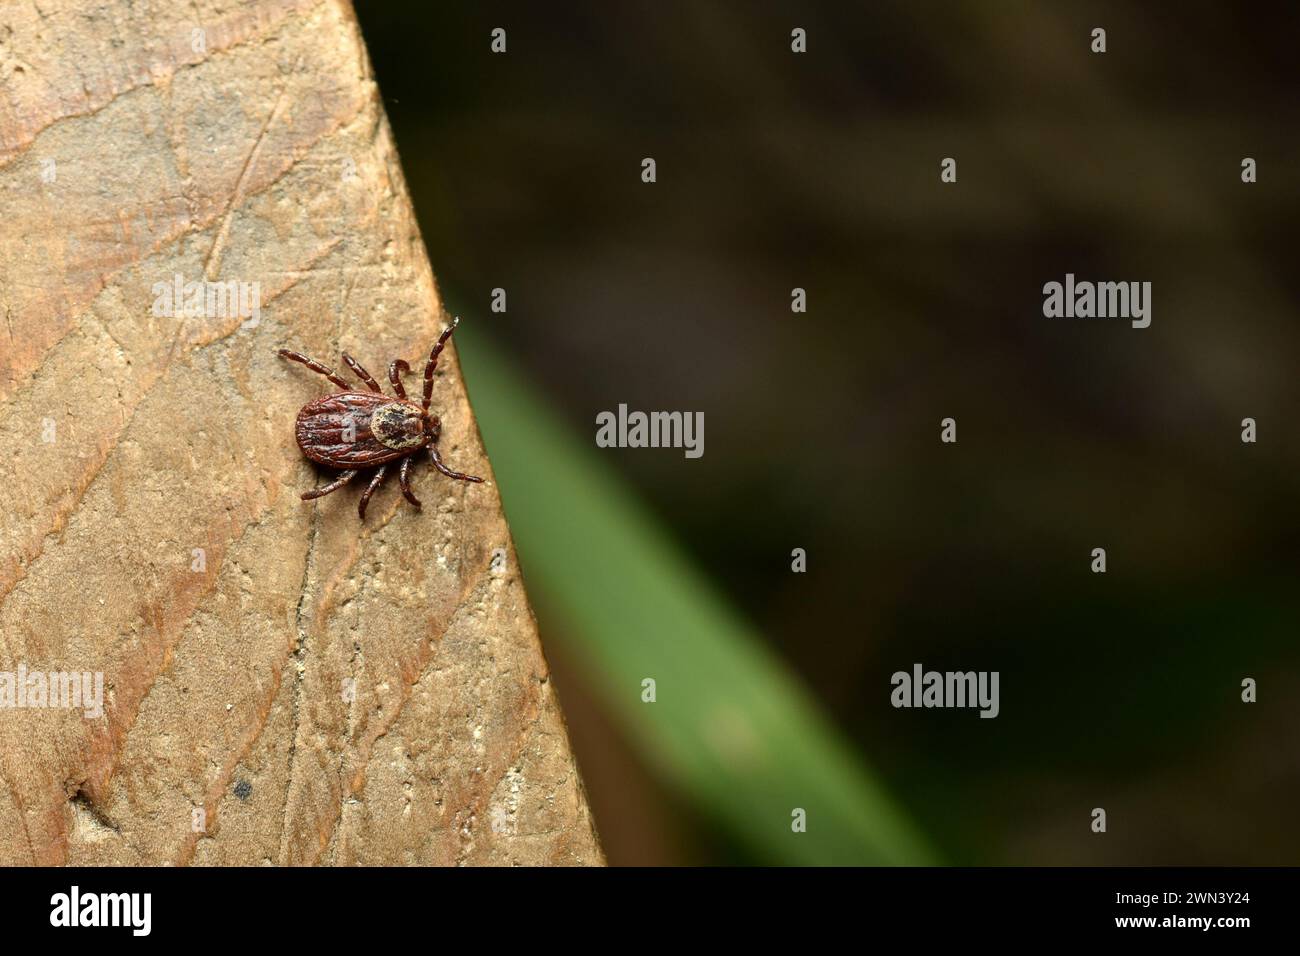 A blood-sucking, infection-carrying tick sits on a board waiting for a victim. Stock Photo